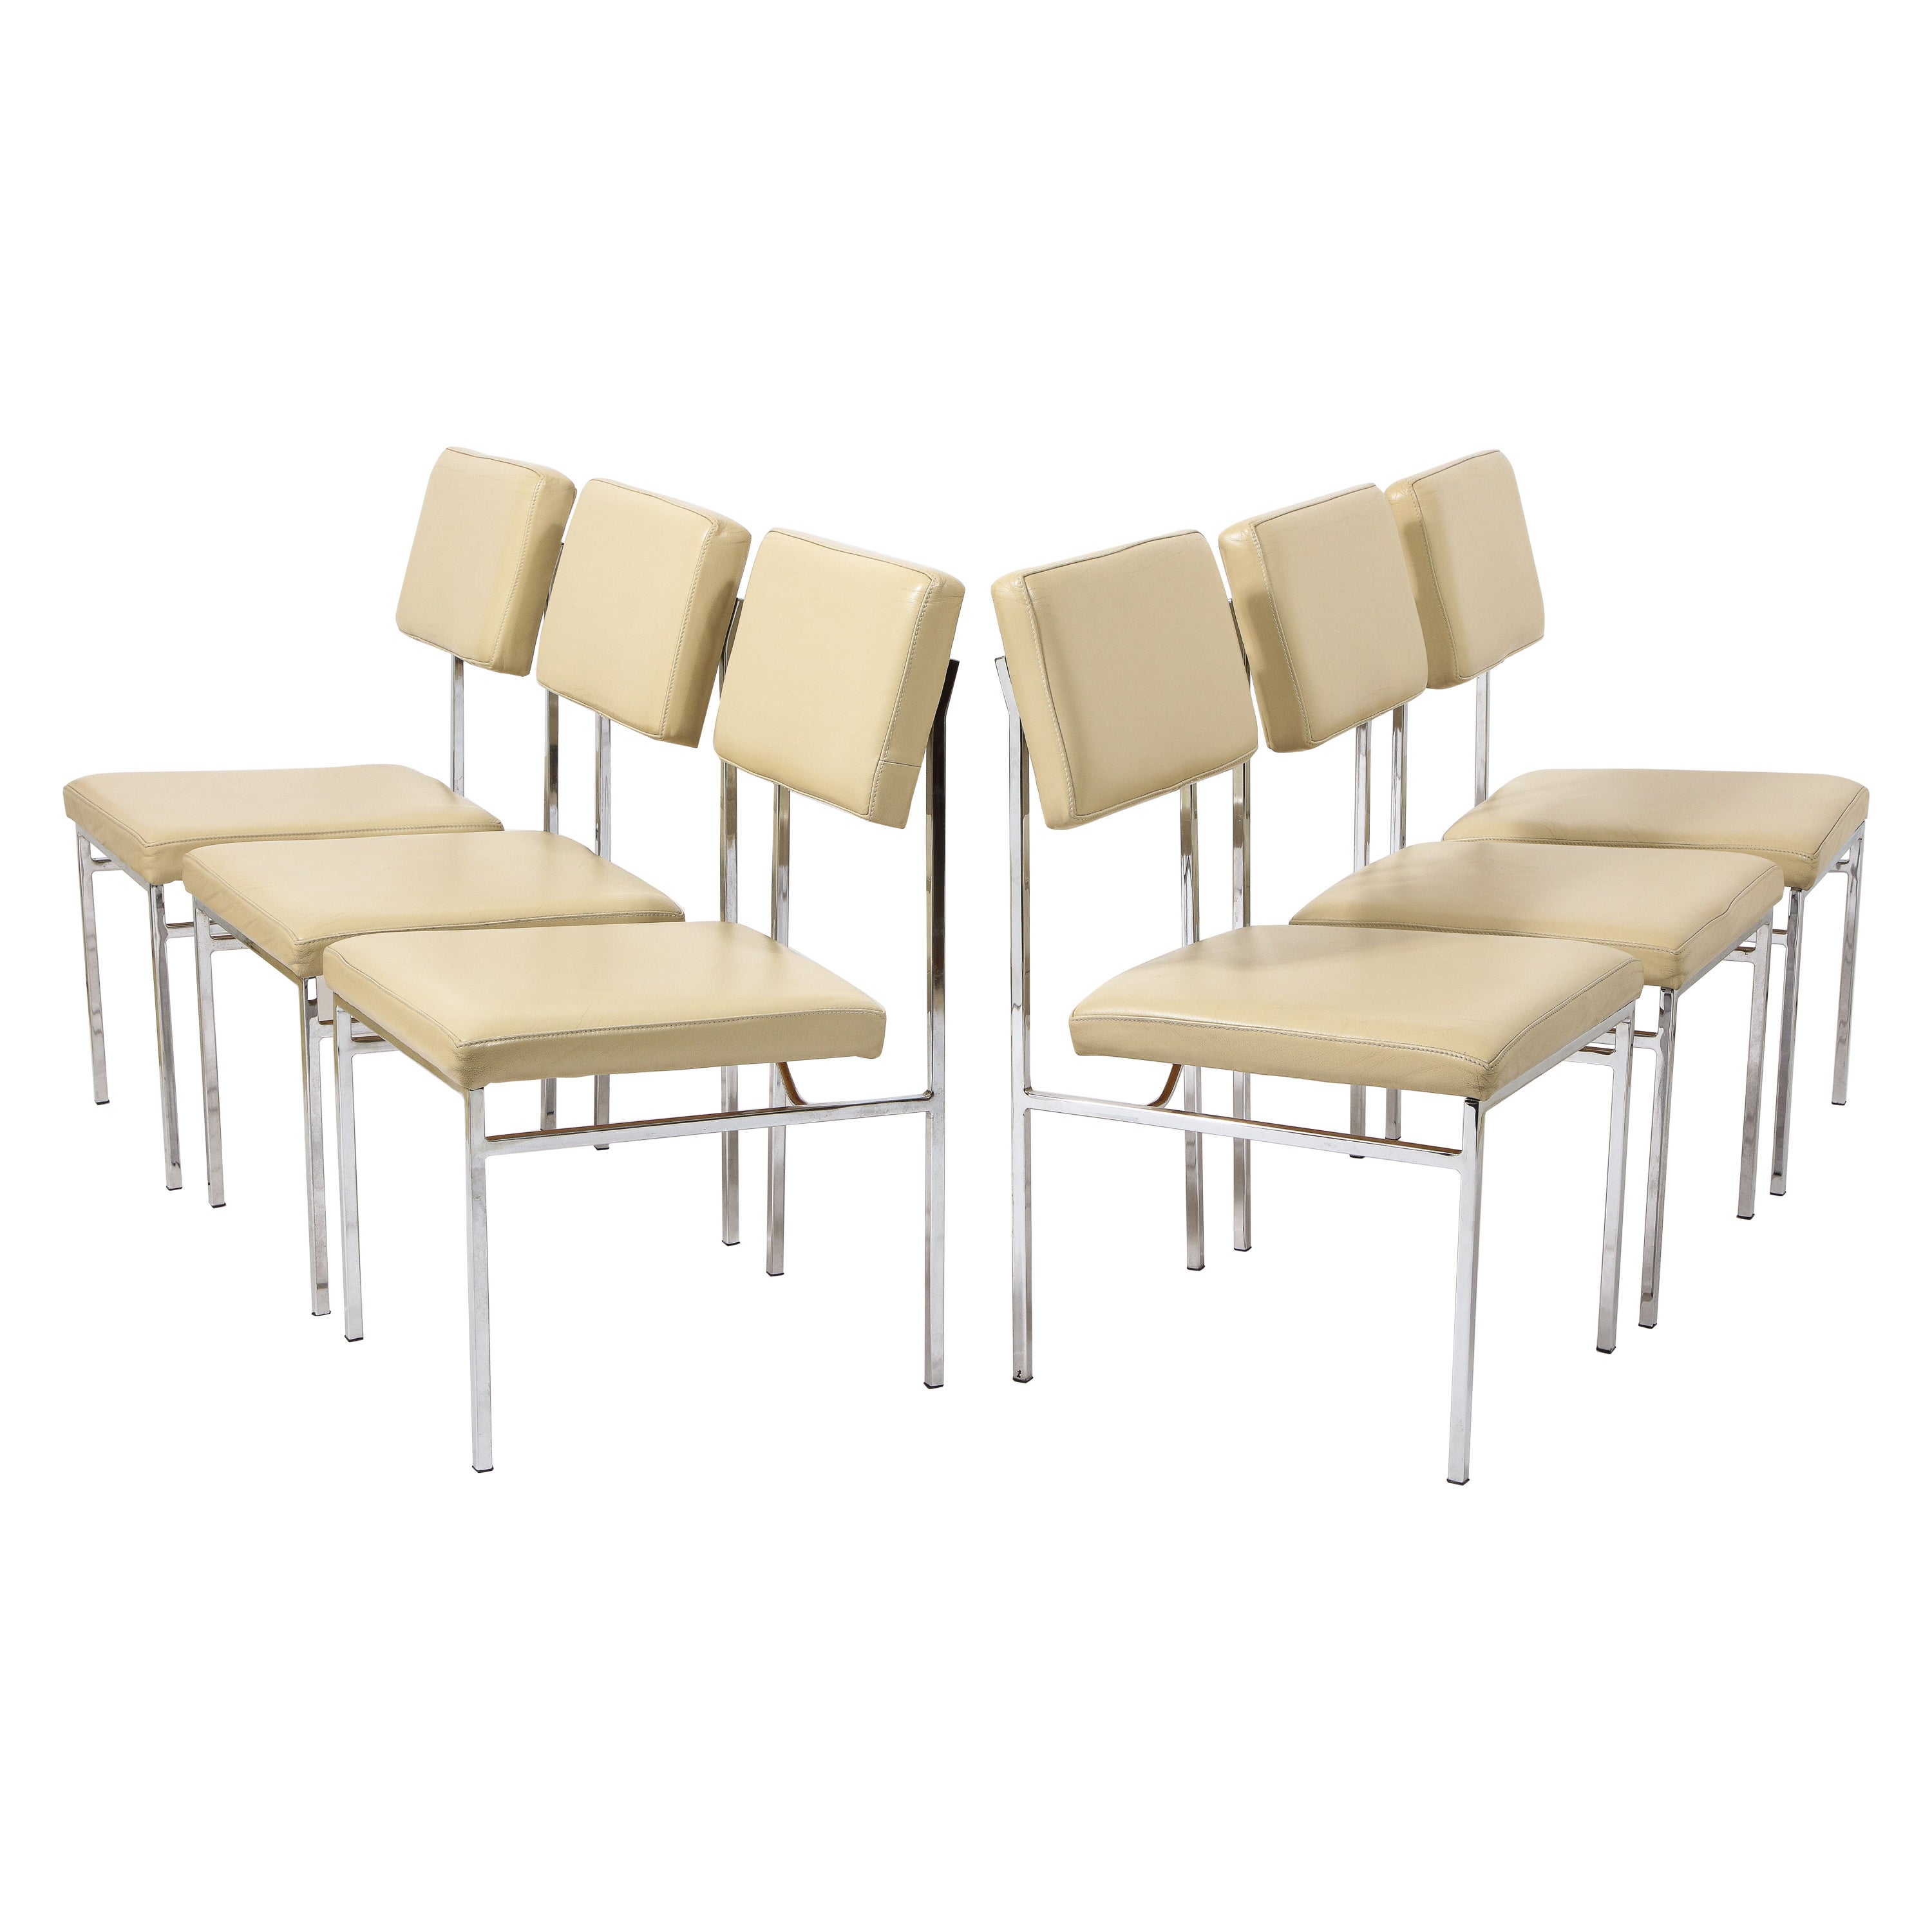 6 Chrome and Cream Leather P60 Chairs by Philippon & Lecoq, France, 1960's